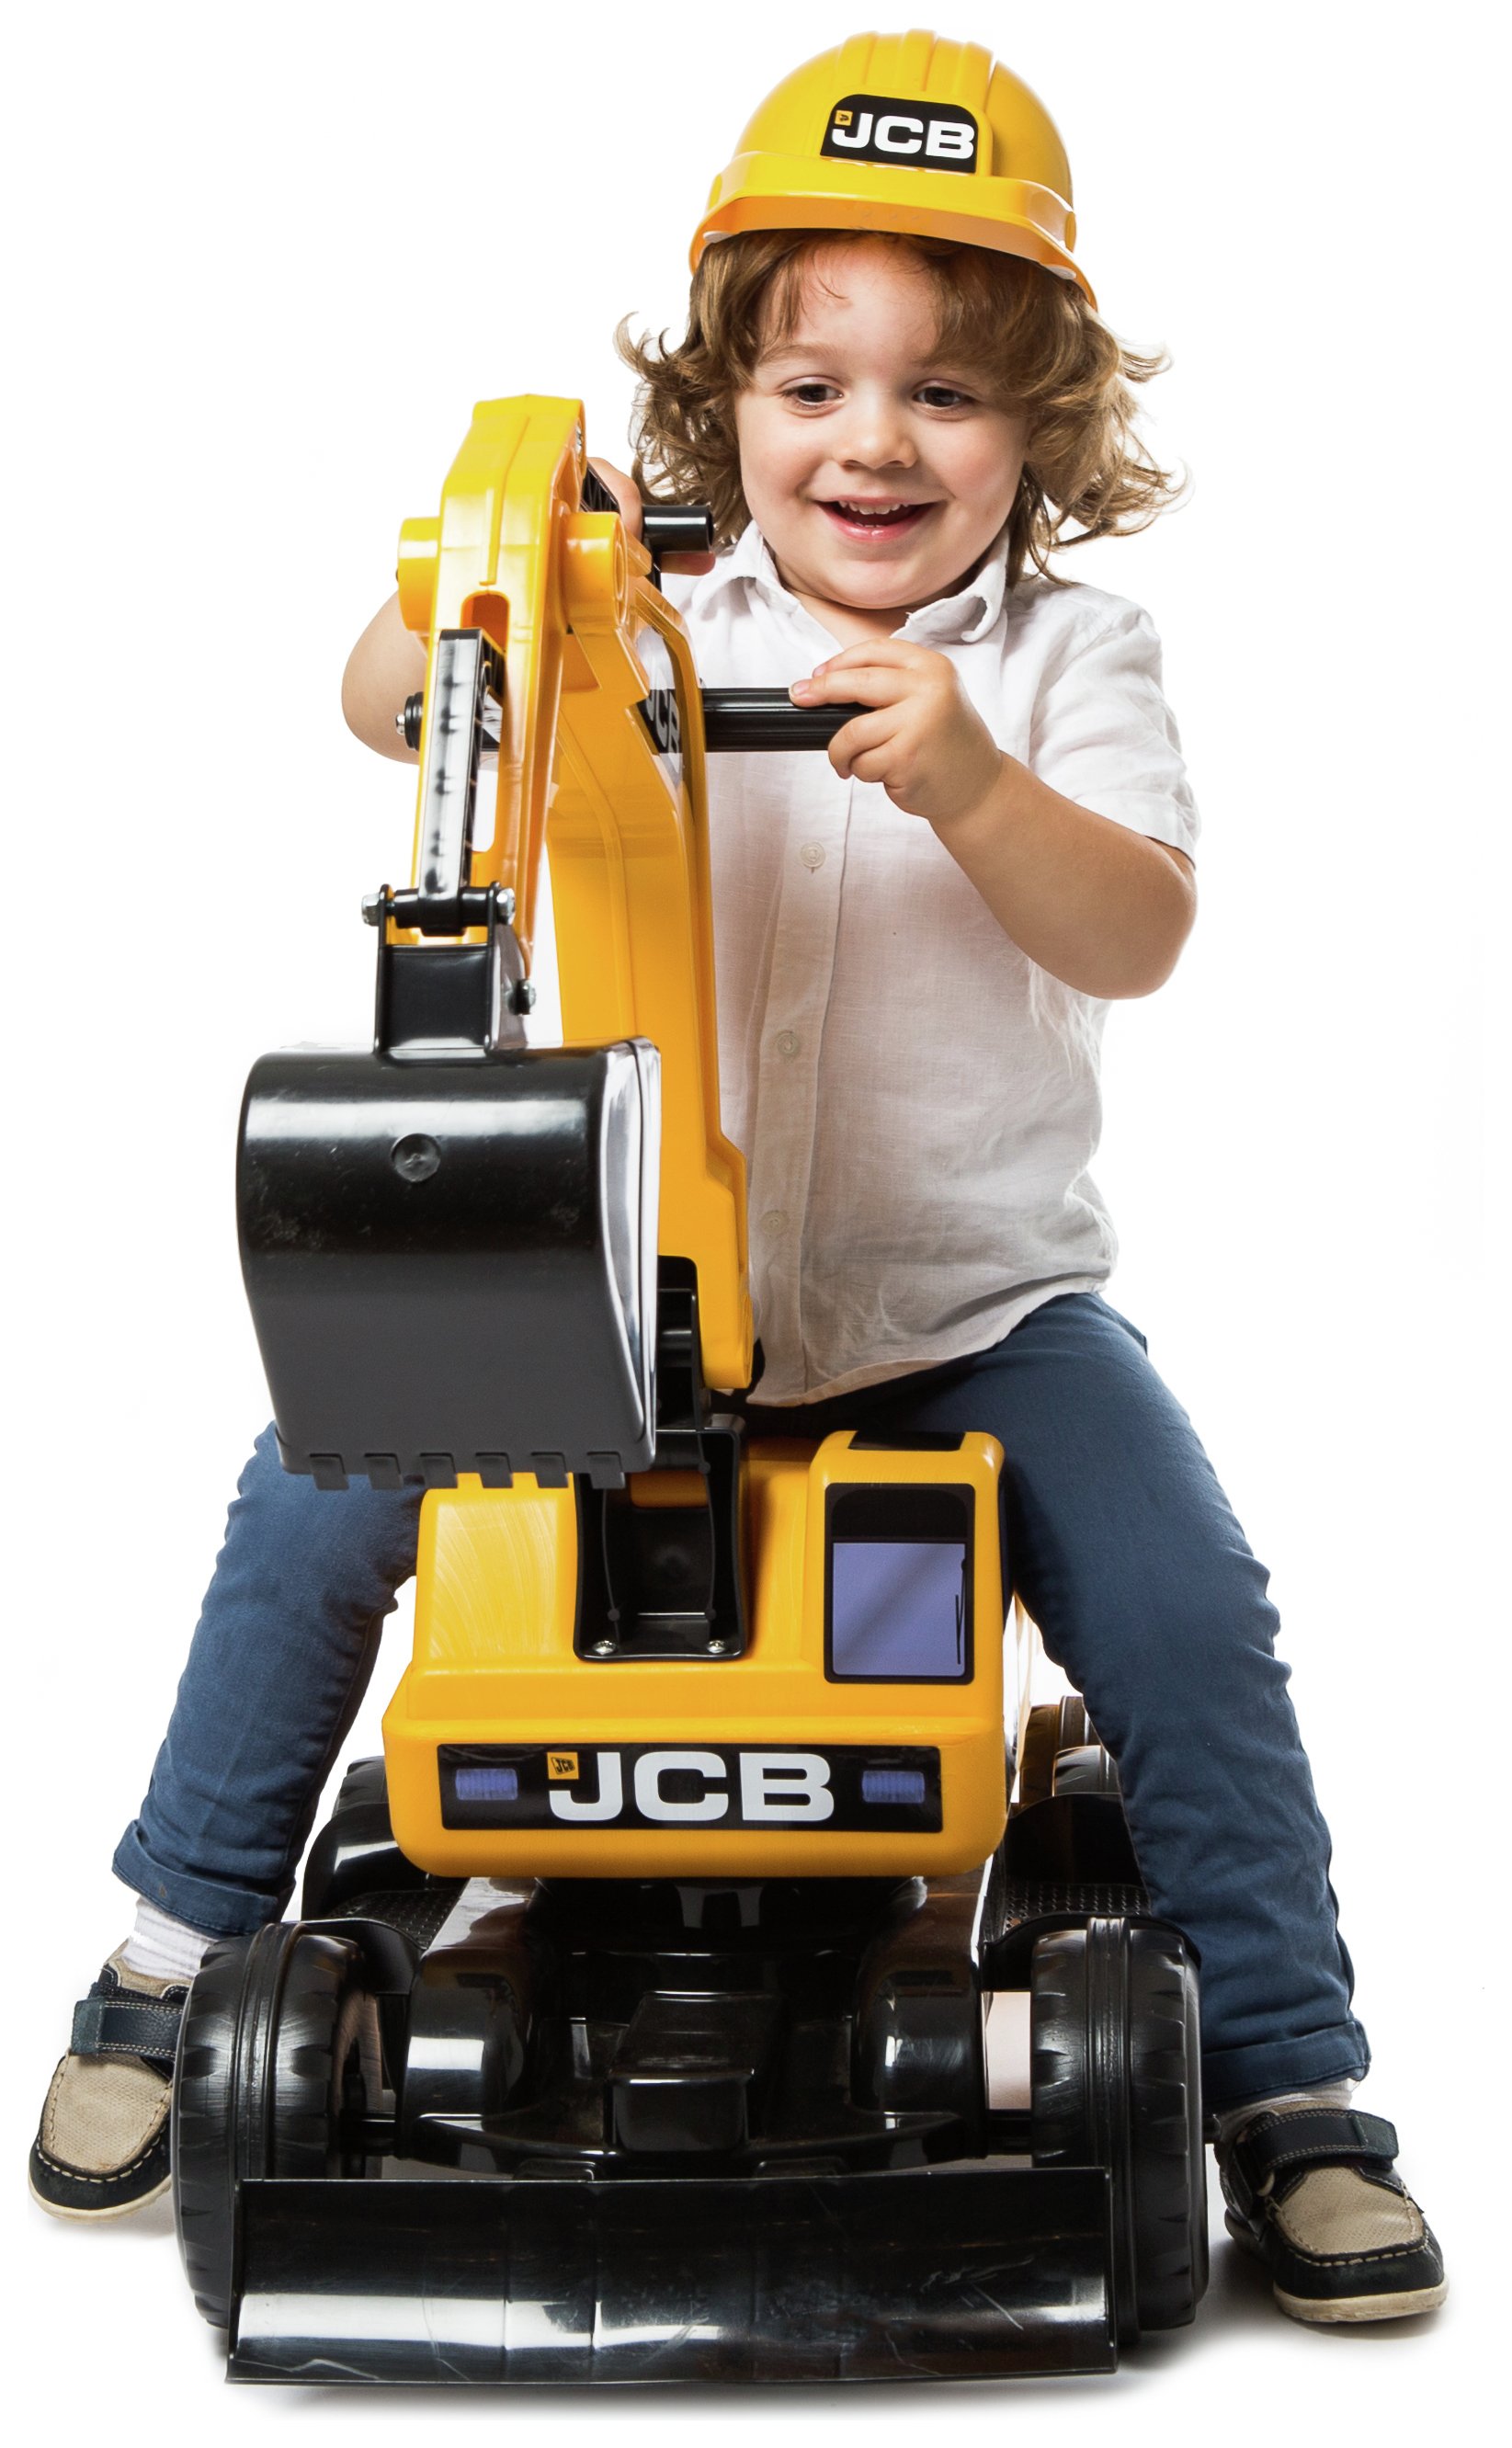 JCB Excavator Trailer and Helmet Ride On Review